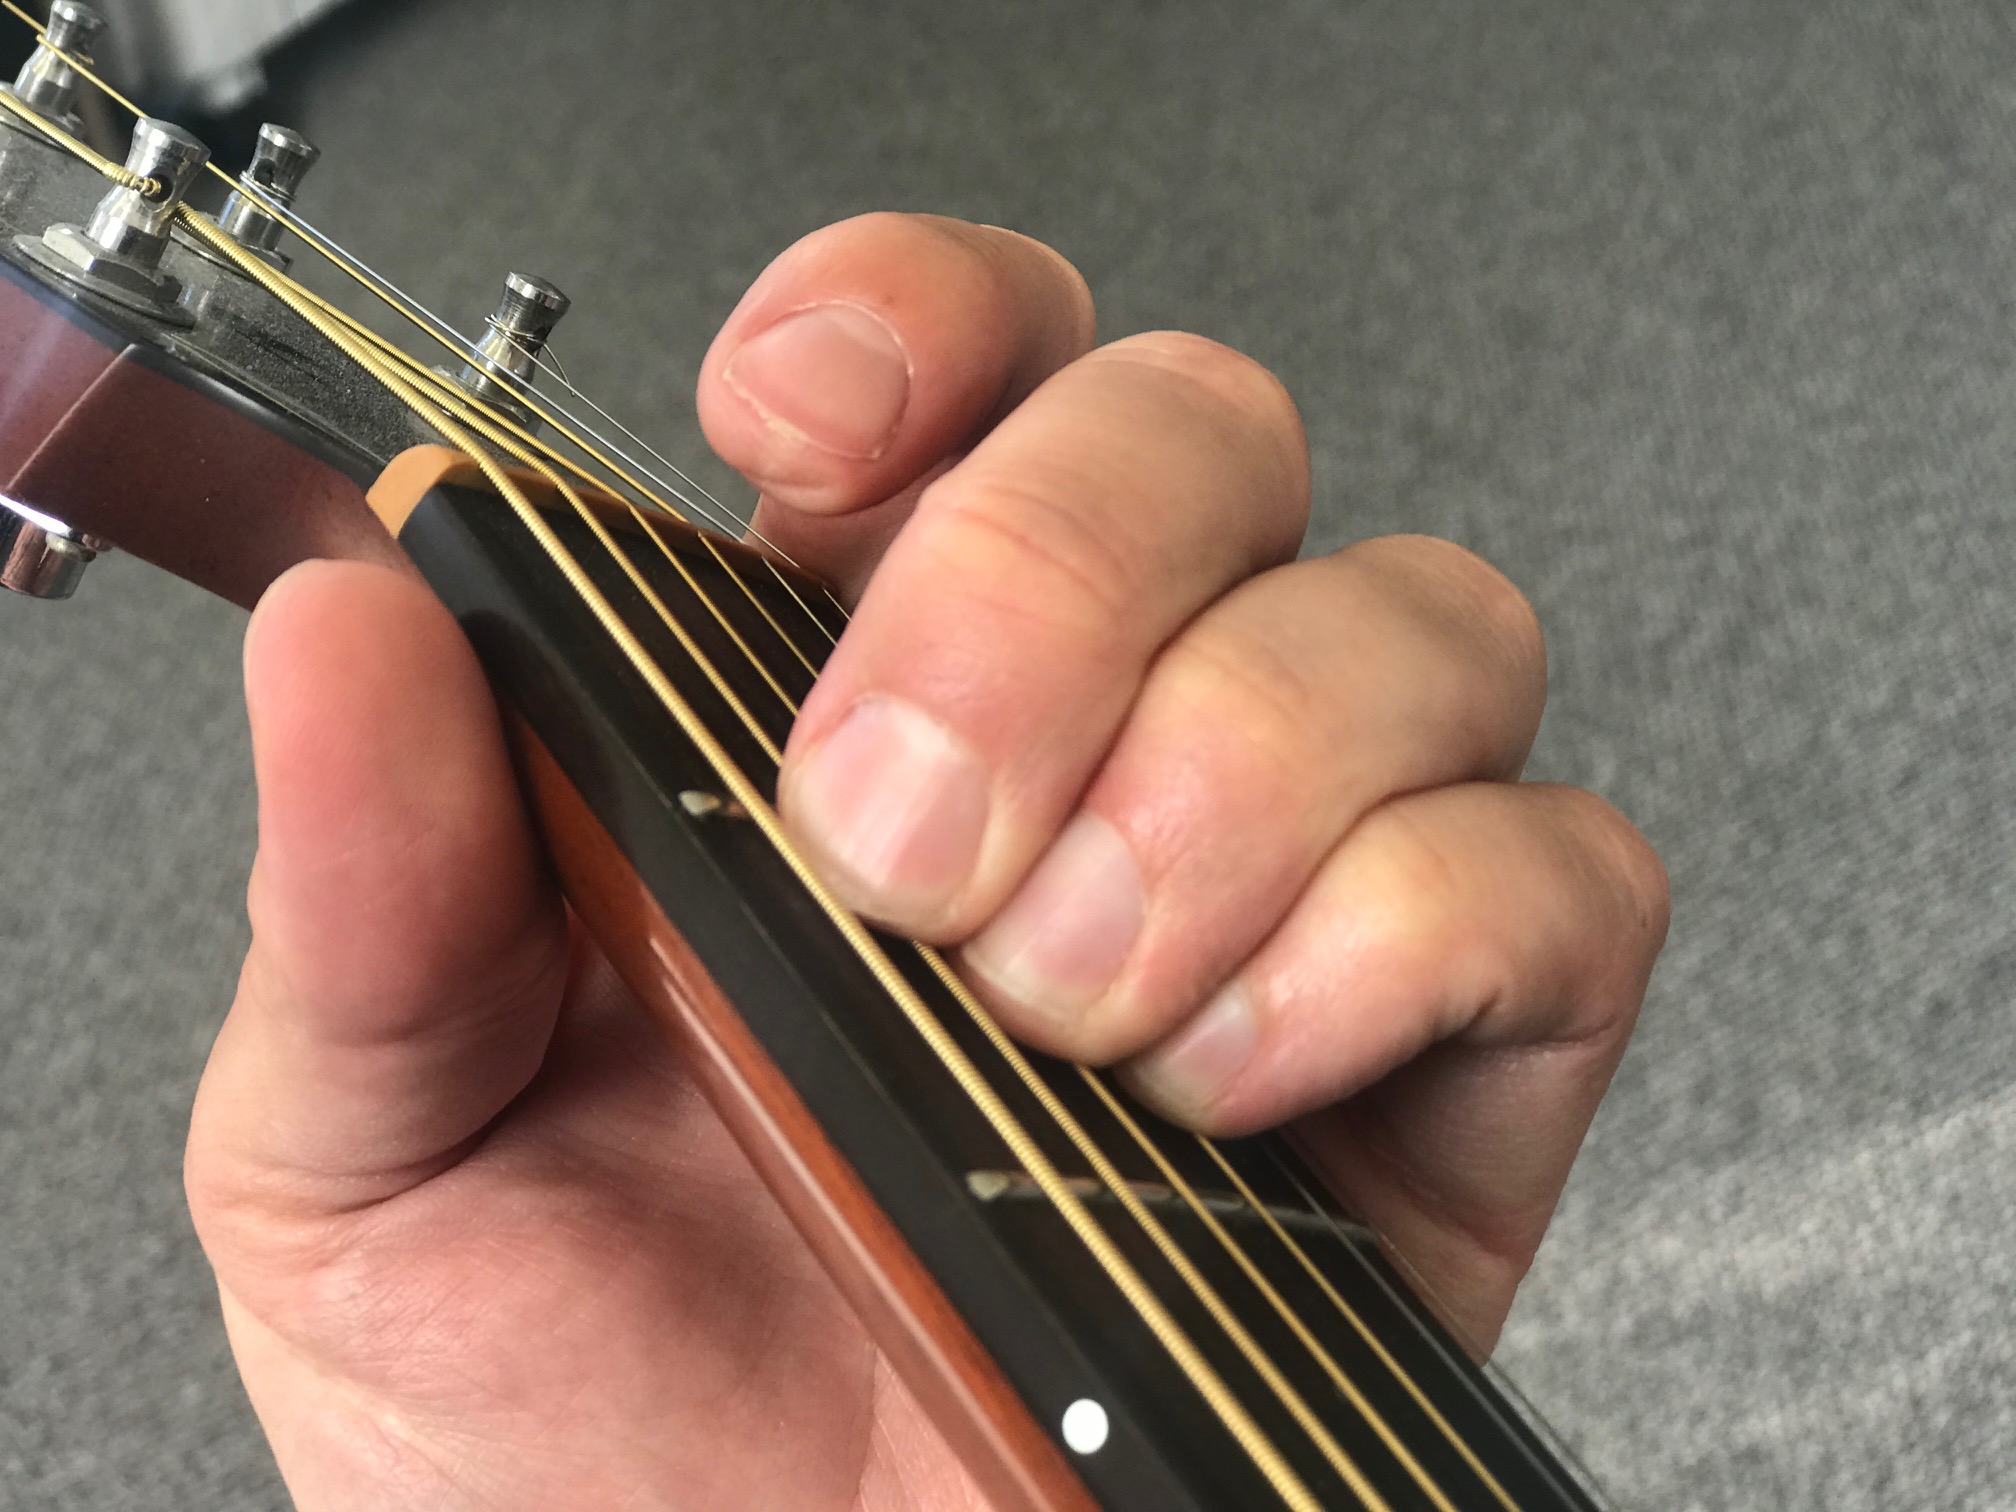 How To Play The Esus4 Chord On Acoustic Guitar - Drue James